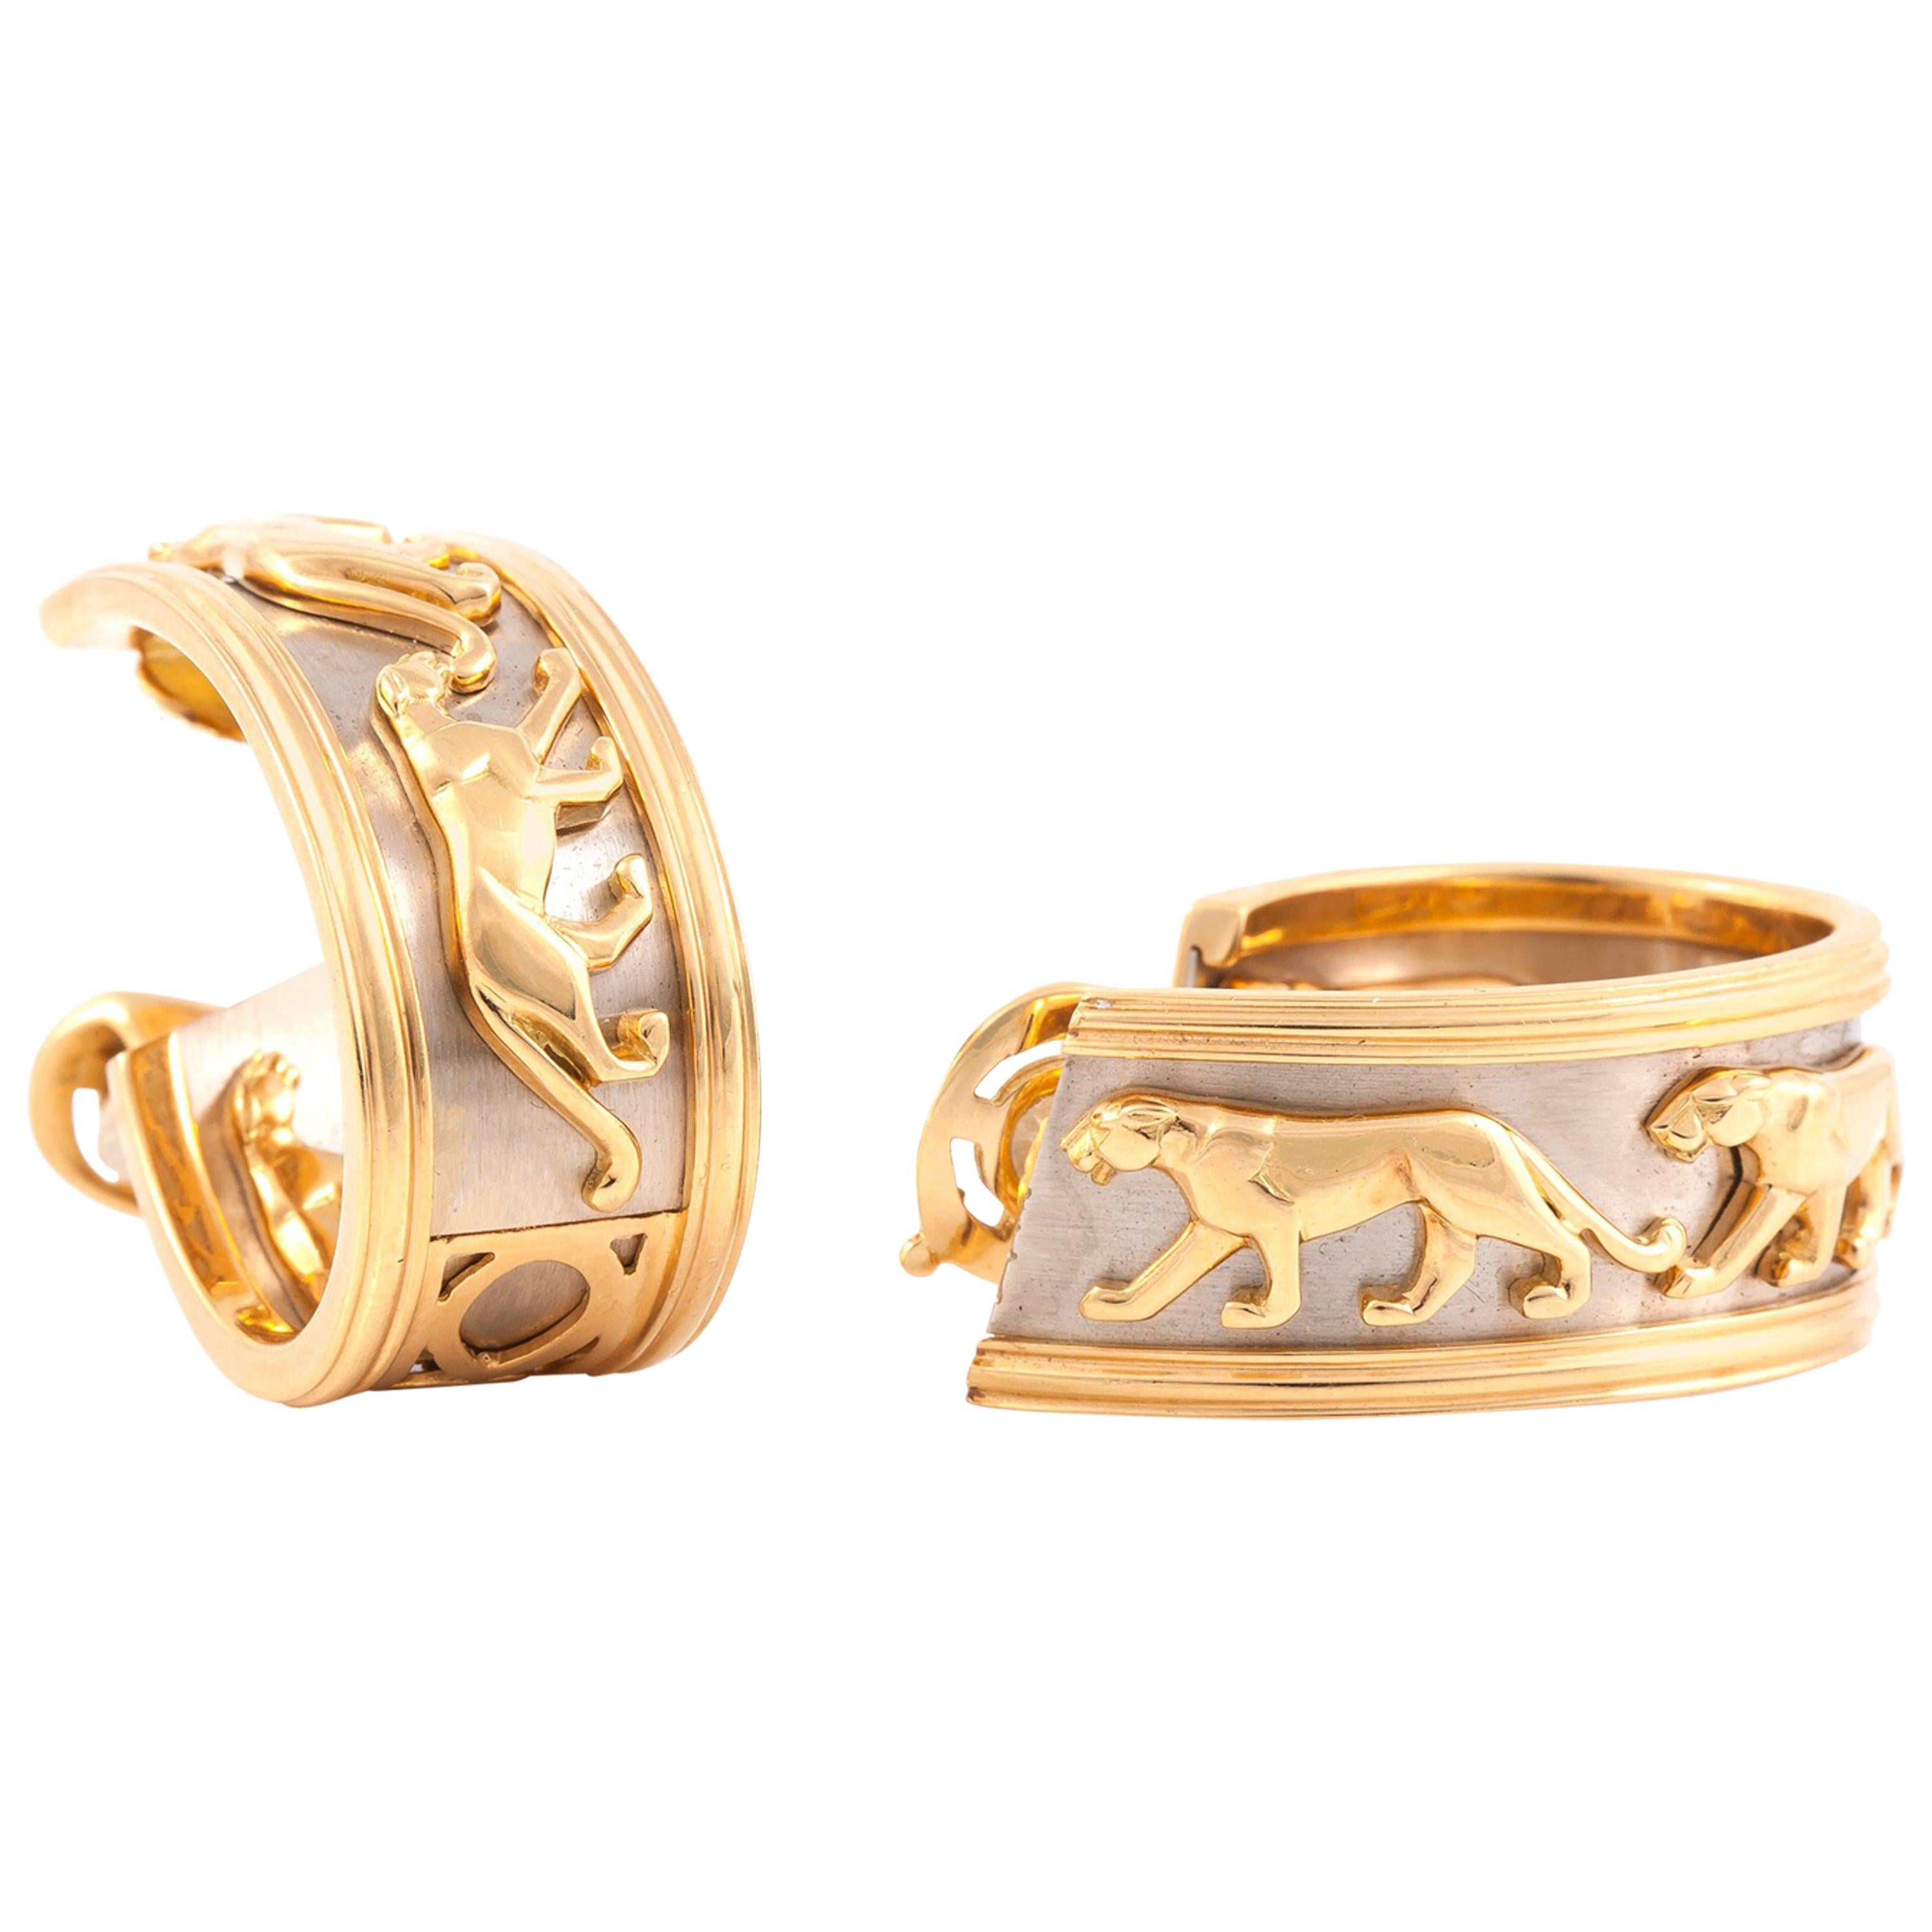 Cartier Panthere Two-Toned Gold Earrings